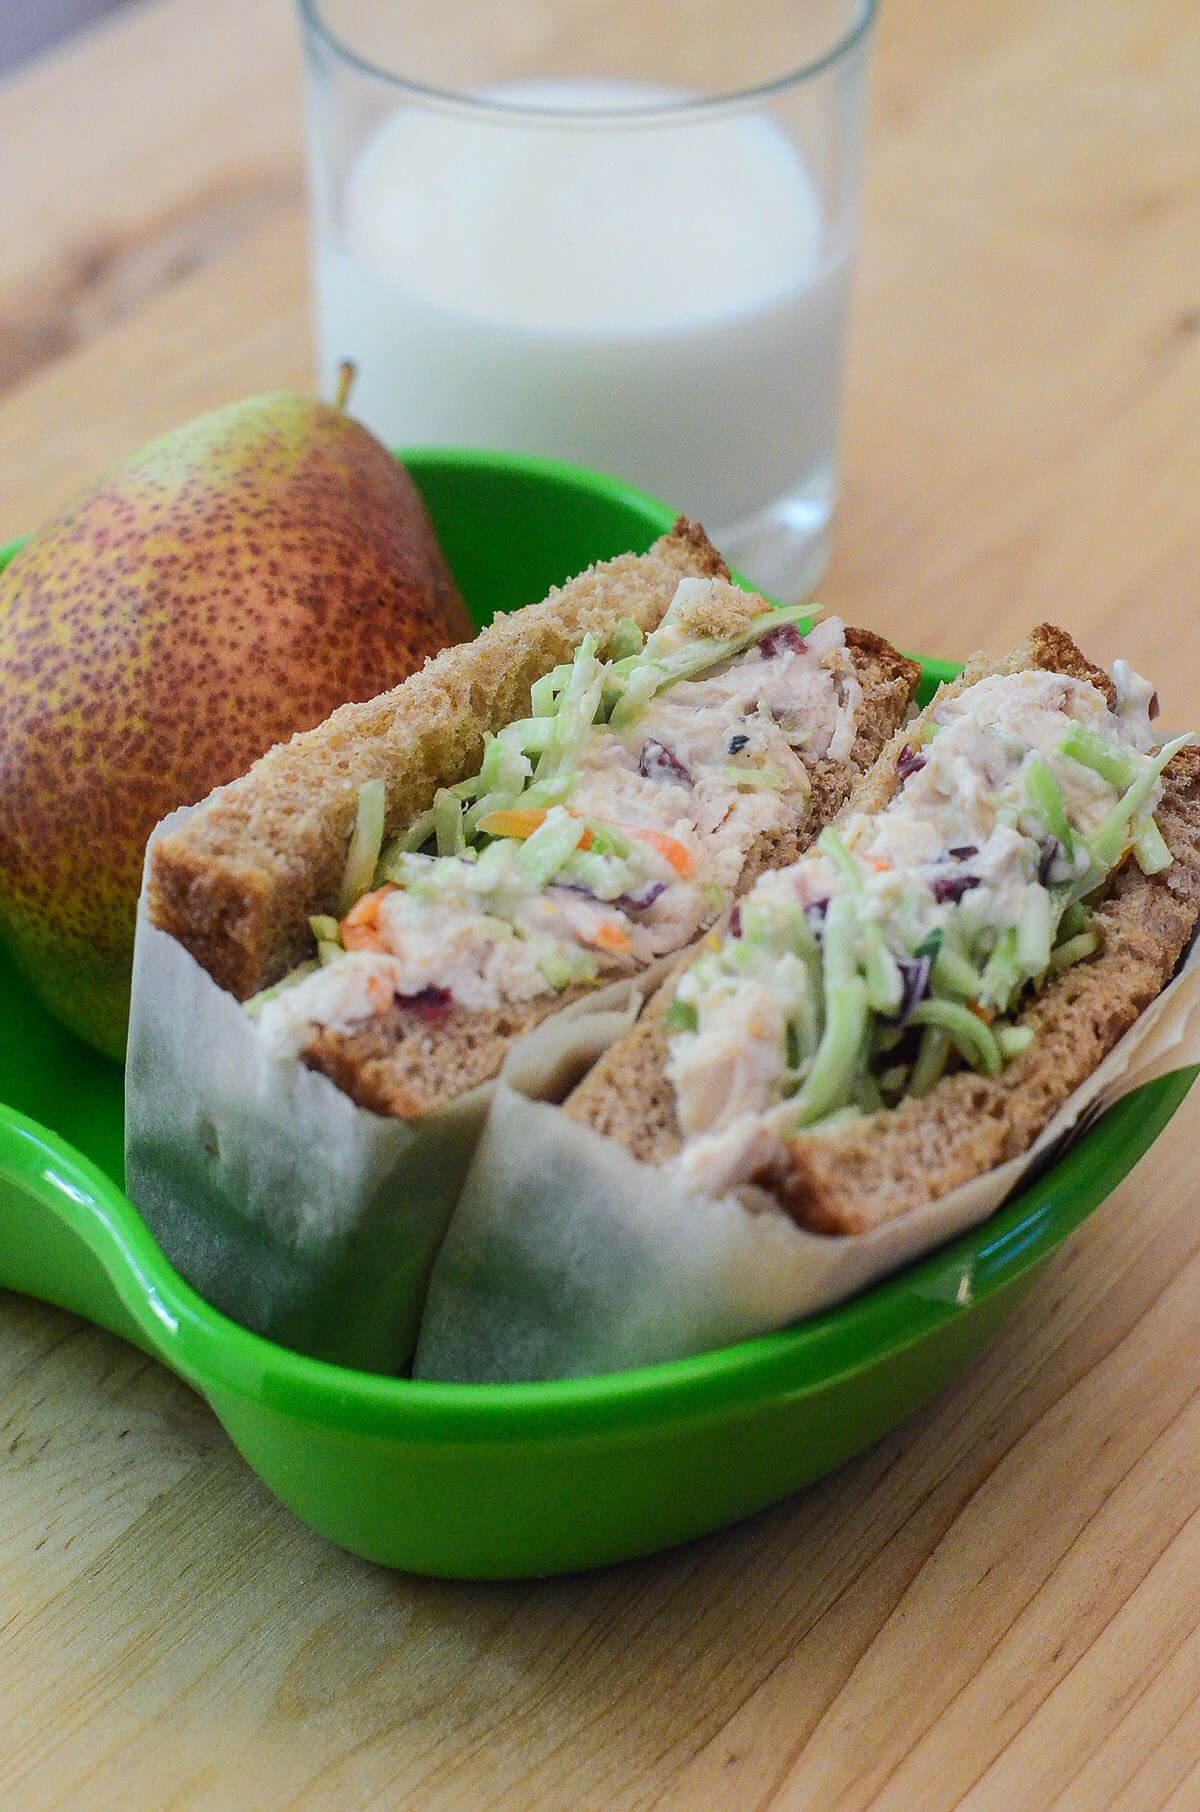 A sandwich and a pear in a green bowl with a glass of milk behind it.